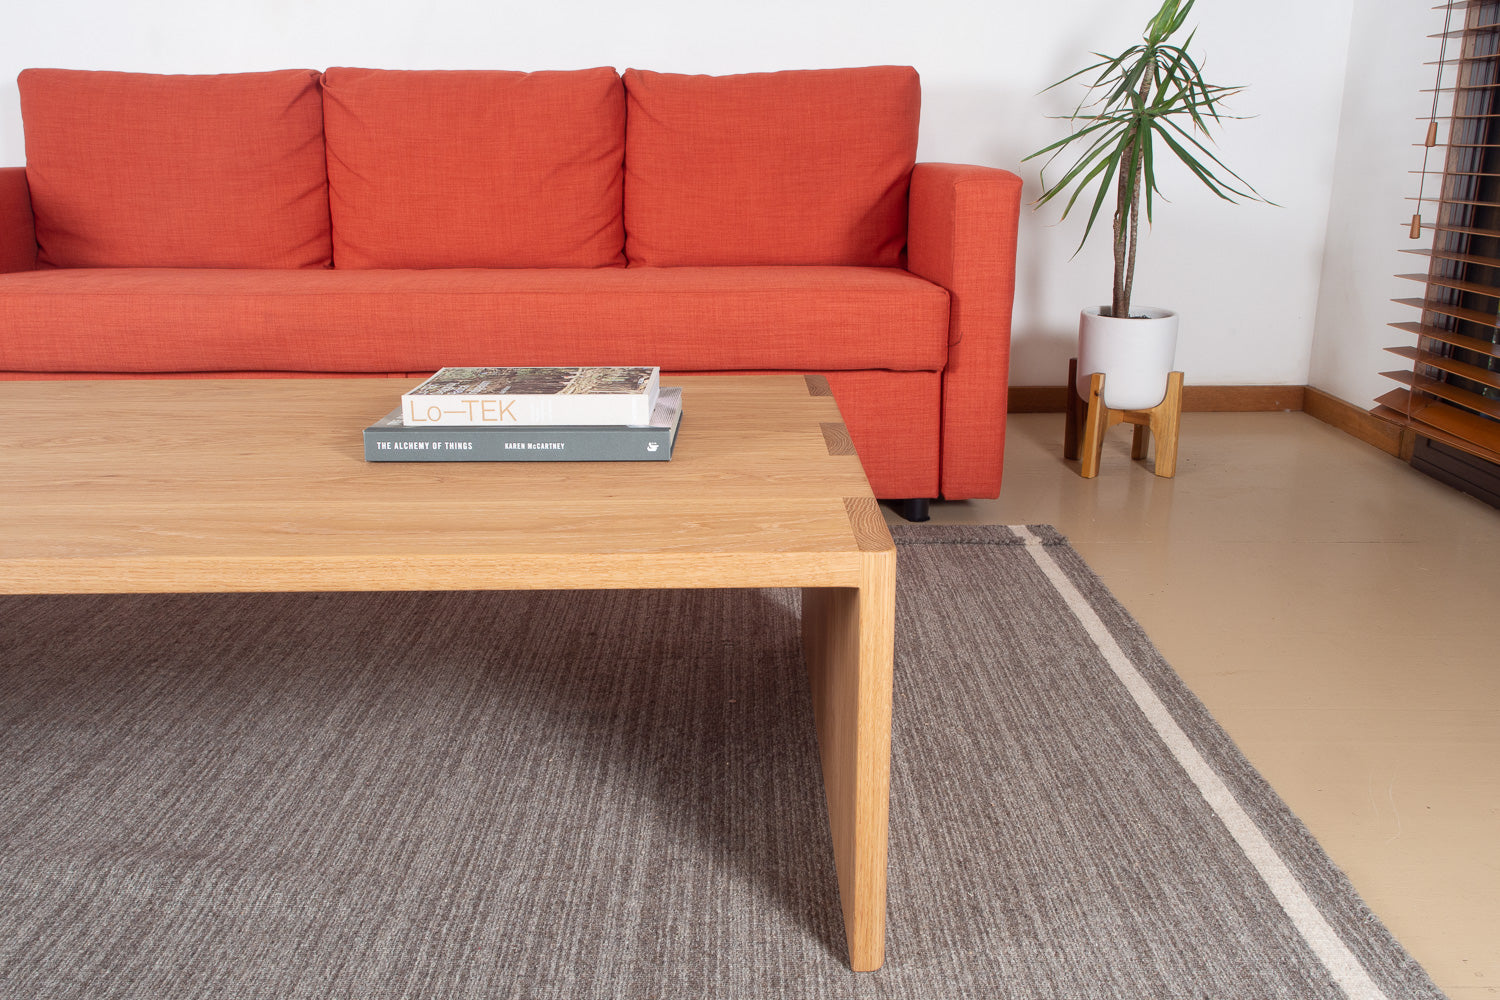 The Mesa Coffee Table in White Oak with two books in front of a sofa and on a rug. Designed and made by Hey, Porter.